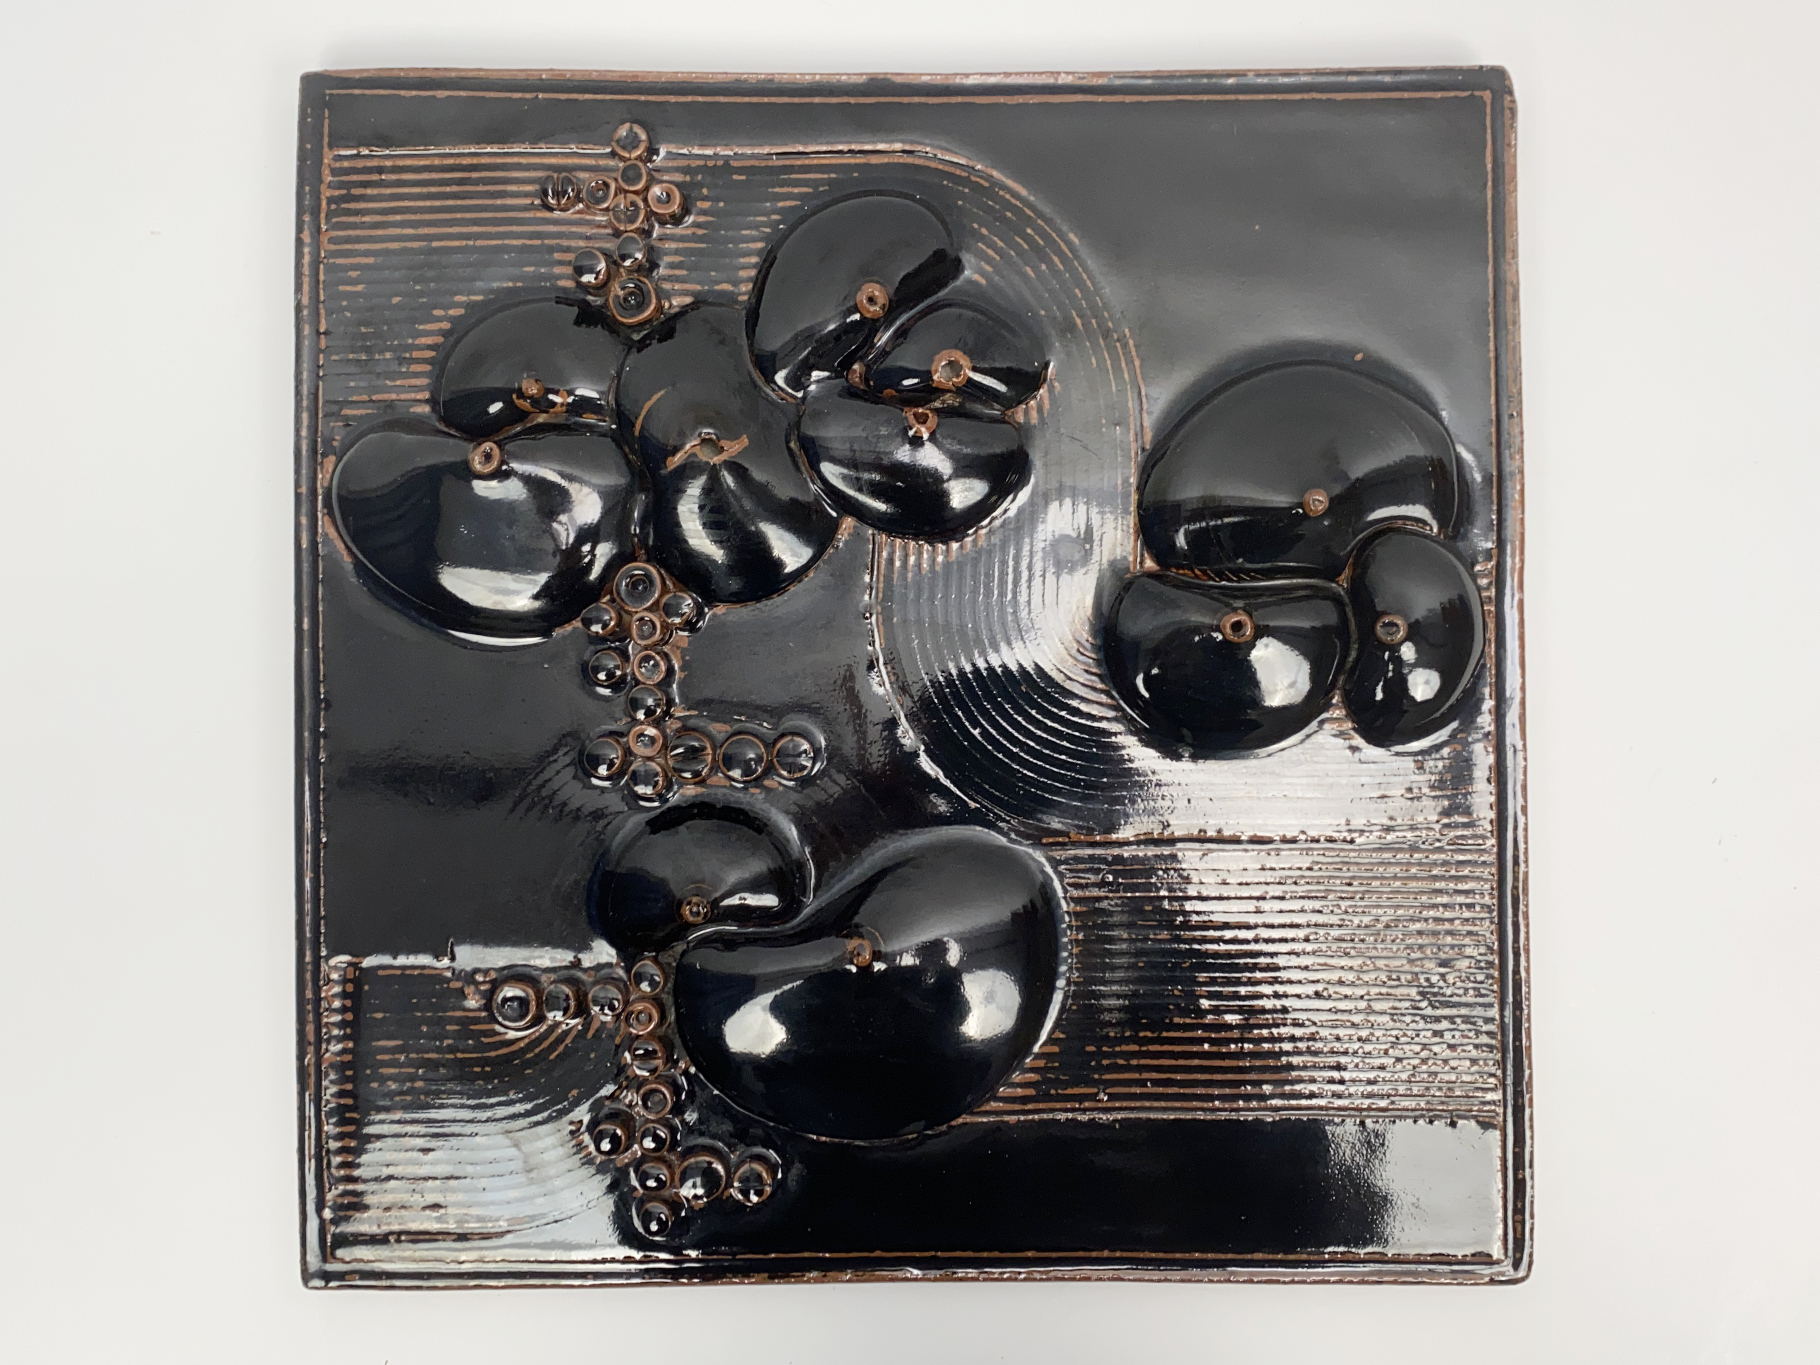 Relief Plate, Object, Ceramic, Stoneware, Unique Piece, assembled from formed Parts, black Iron Glaze, by Wilhelm & Elly Kuch, 1974